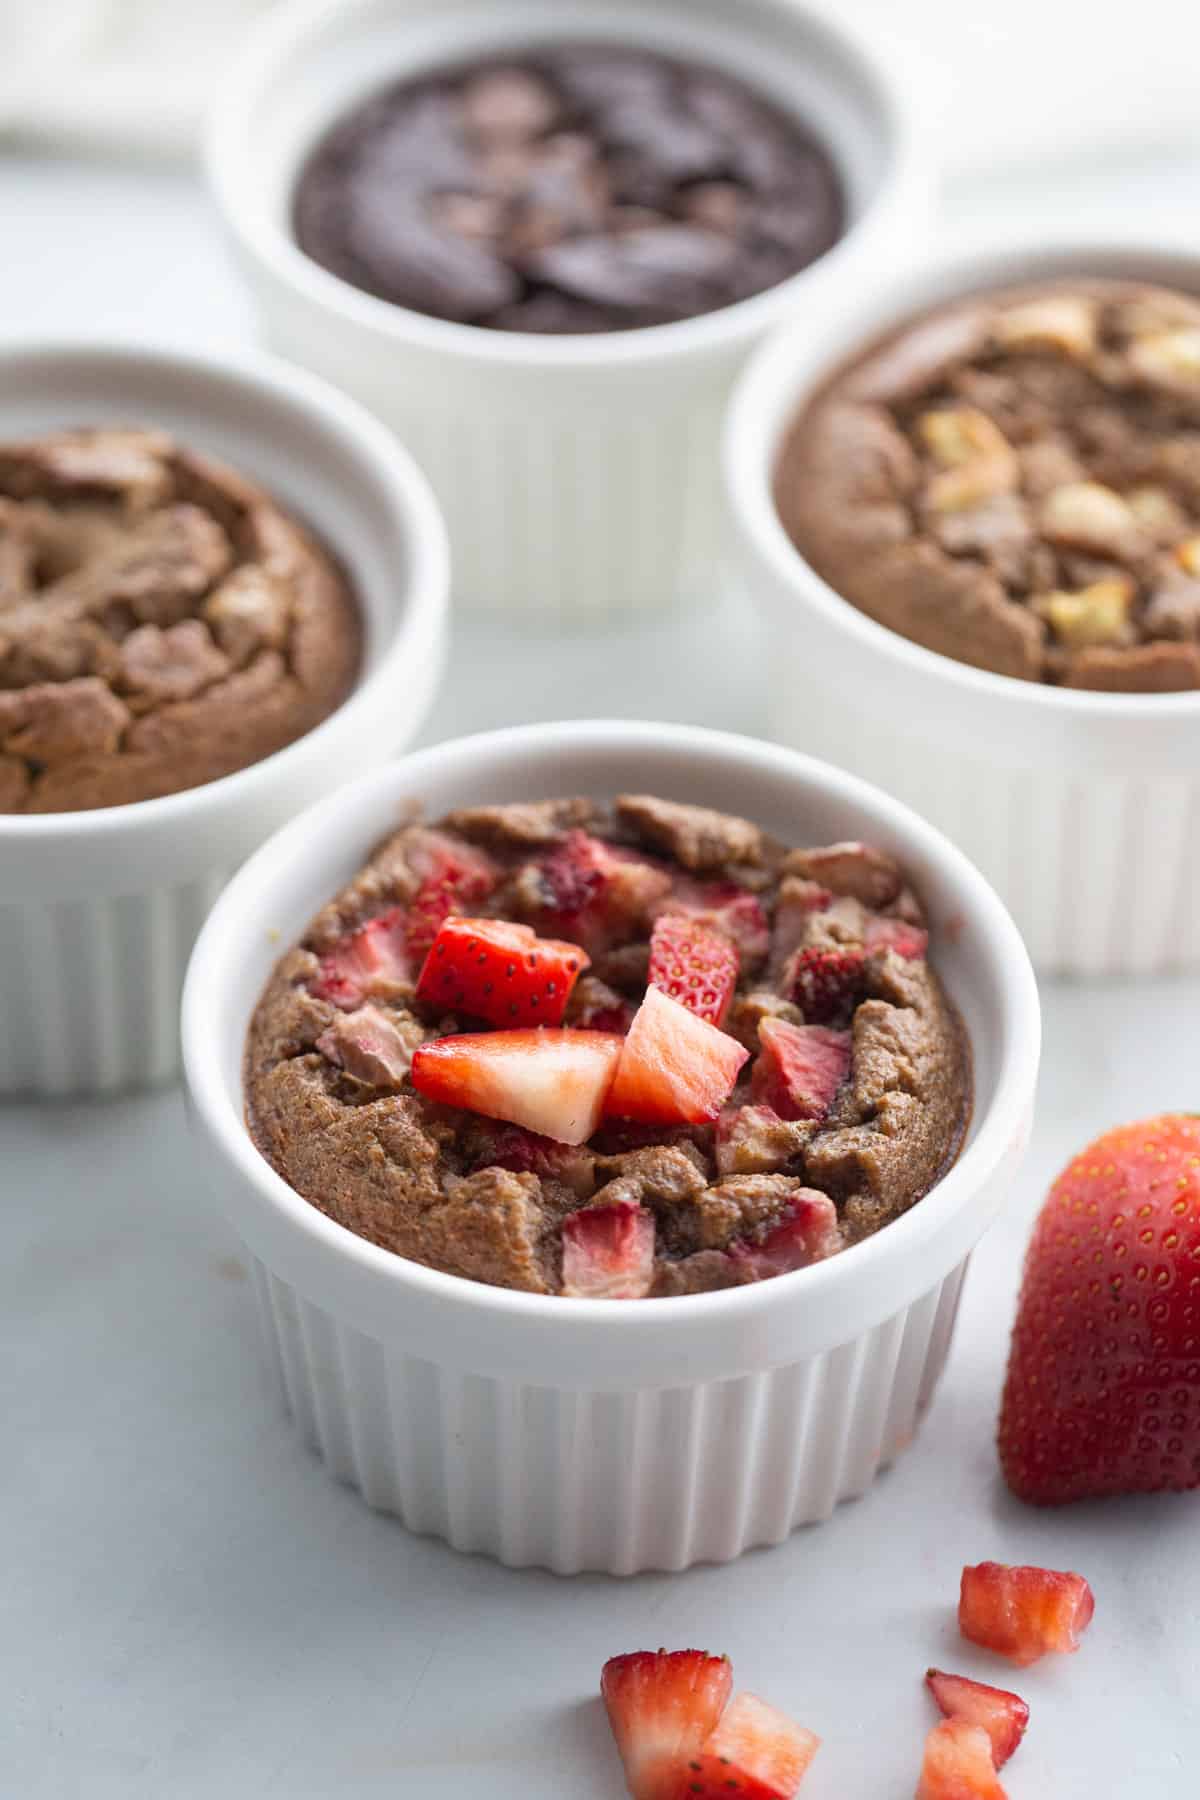 Blender baked oats 4 ways: strawberry, apple, peanut butter banana, and chocolate.